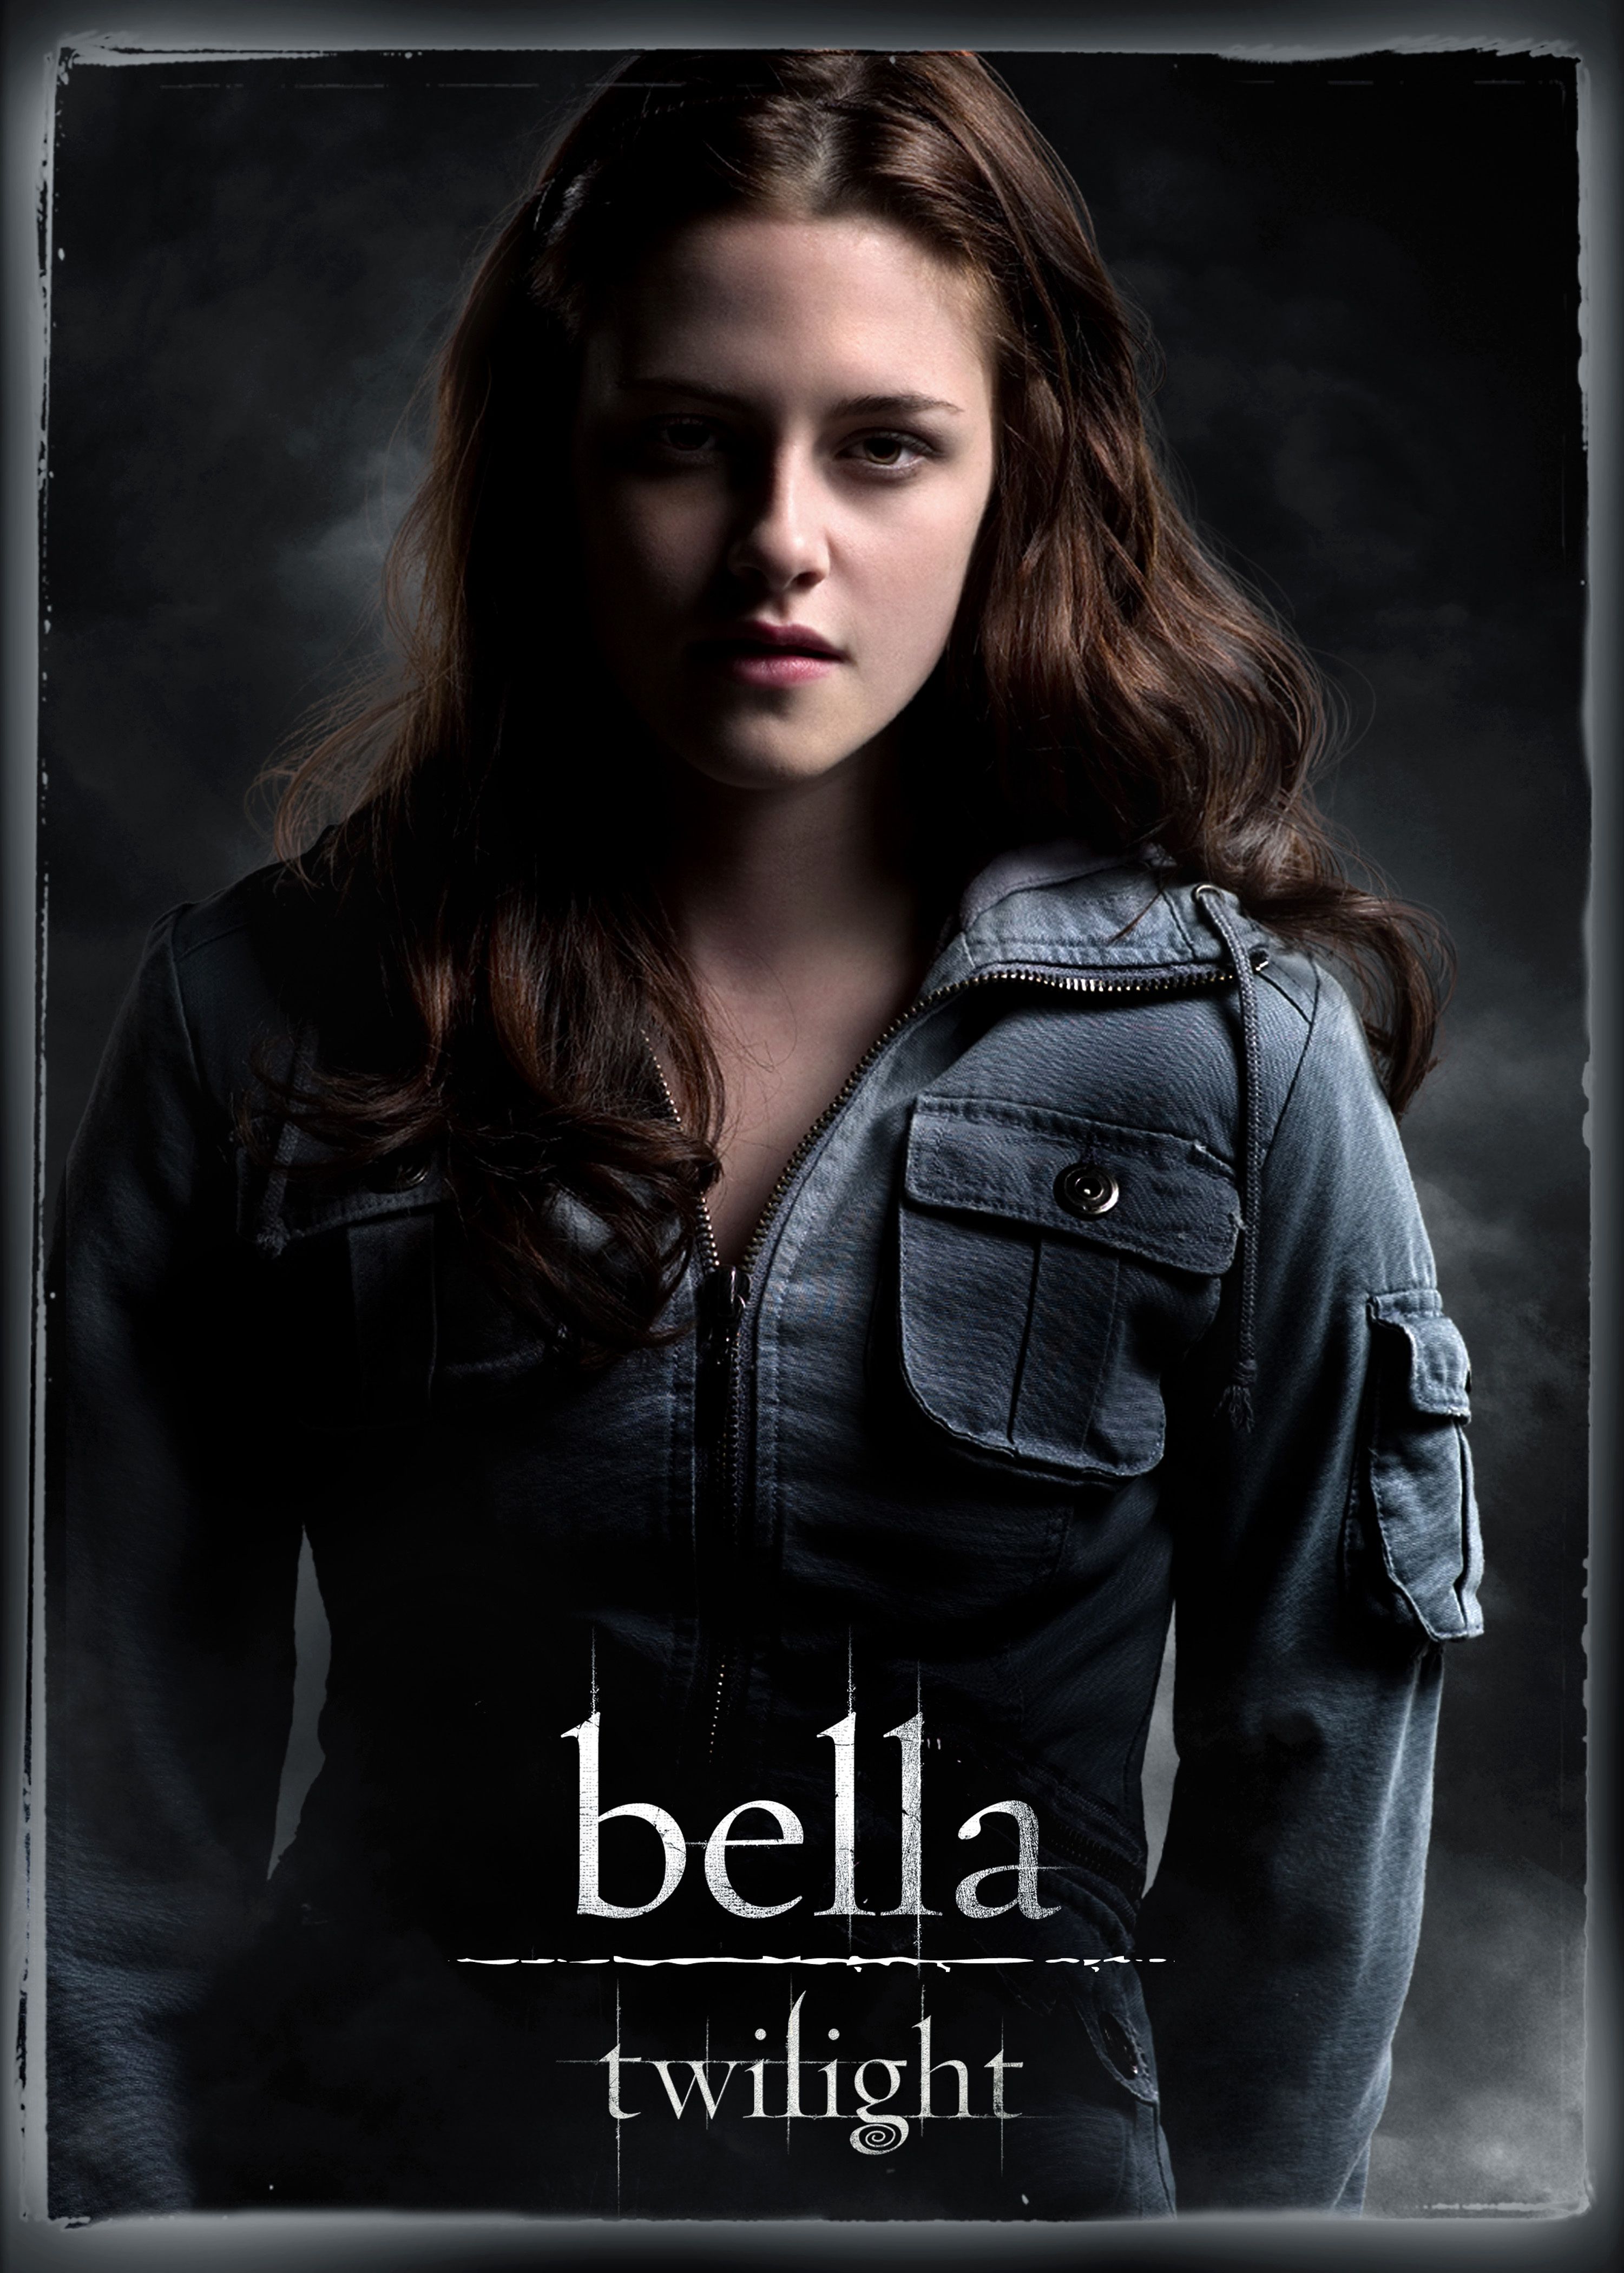 image of Bella from Twilight as played by Kristen Stewart